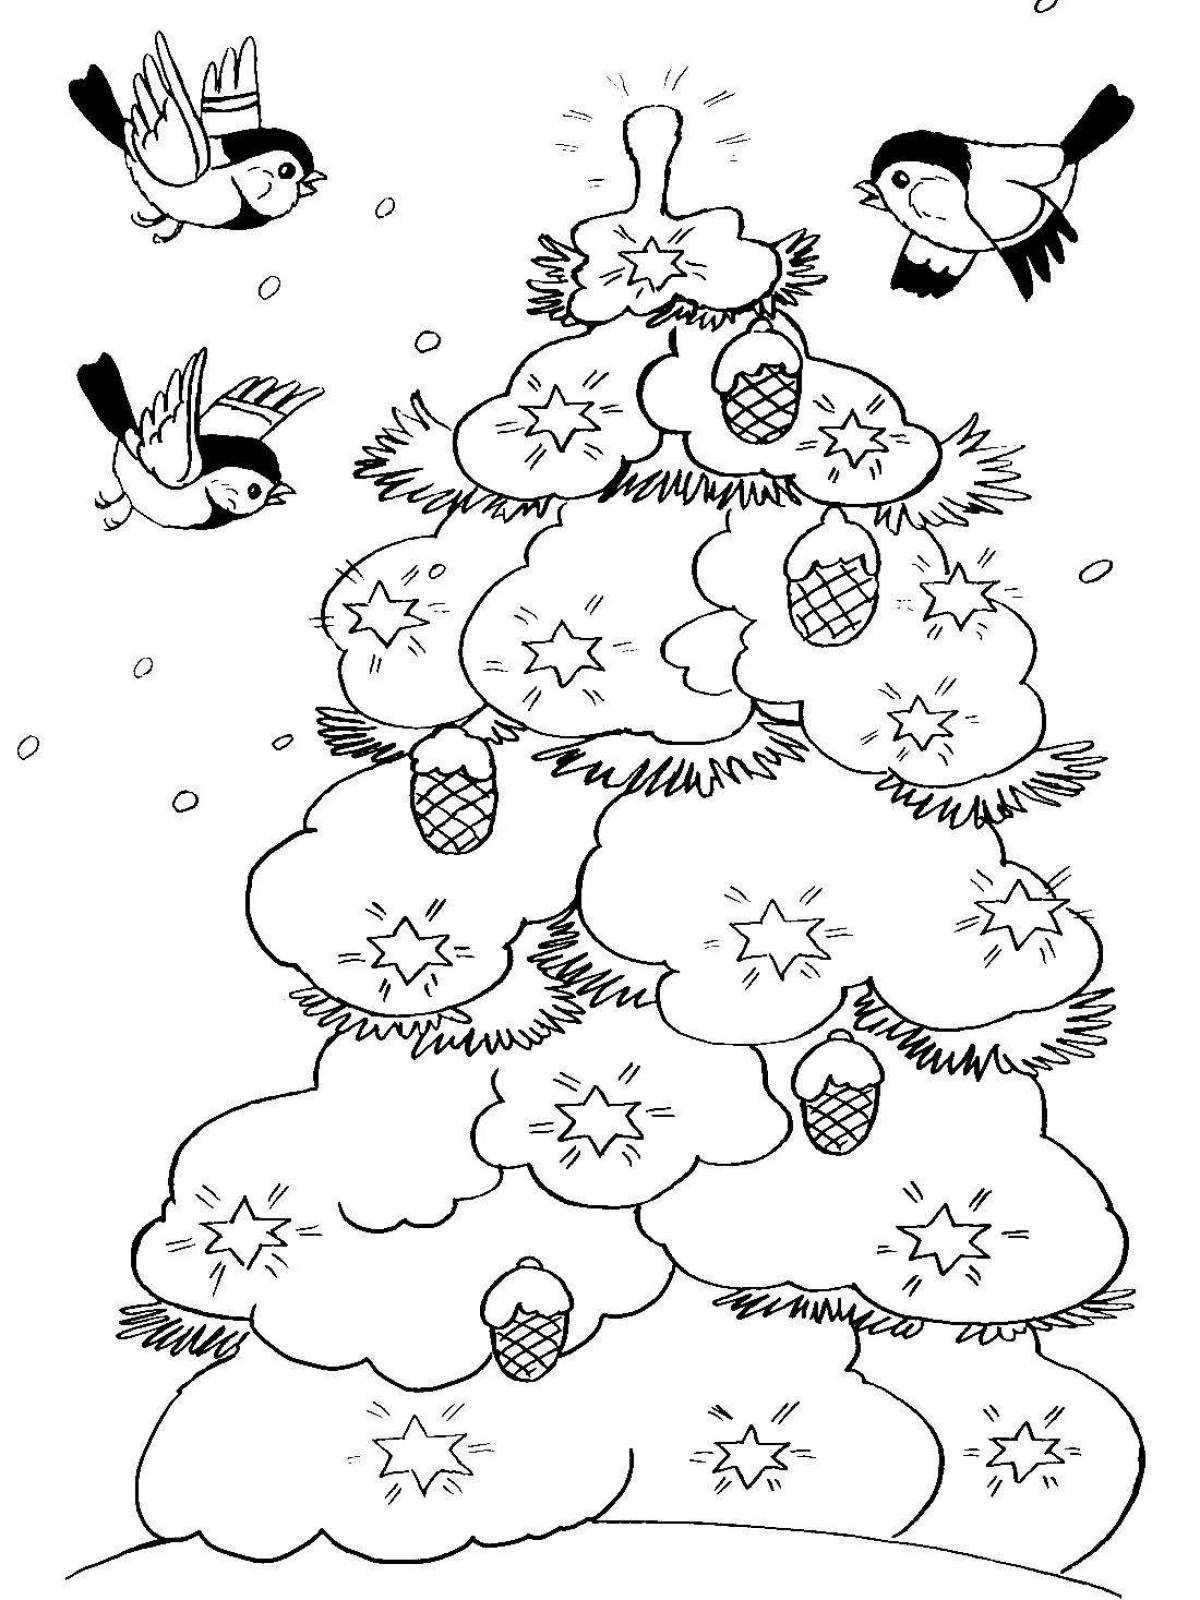 Coloring book shining tree in the snow